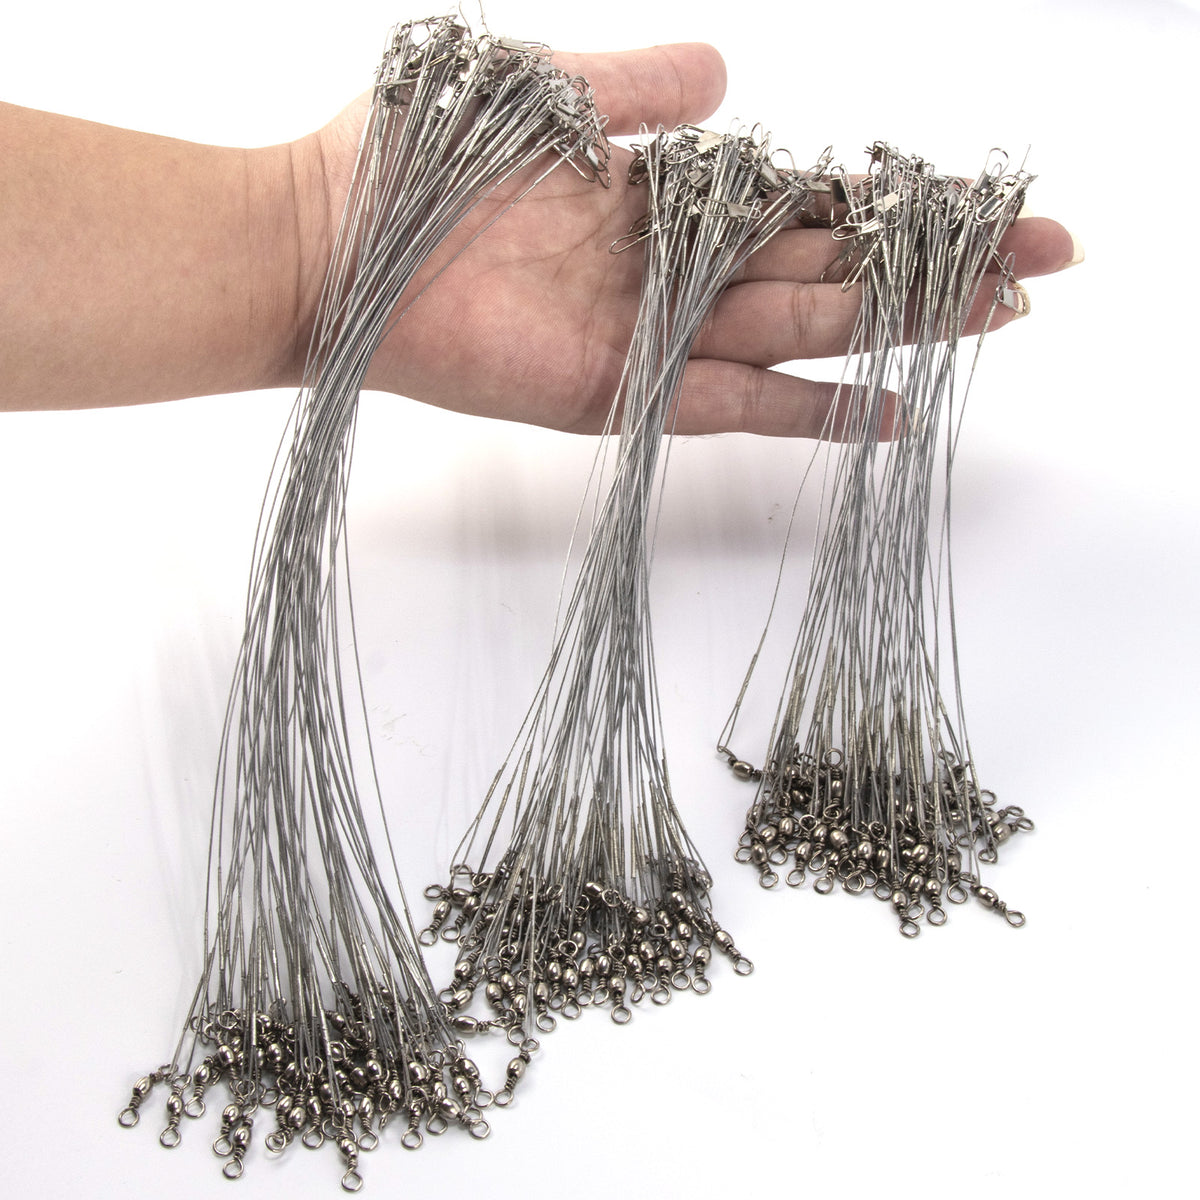 Dr.Fish 50pcs Stainless Steel Wire Leader 40lb 15-25cm